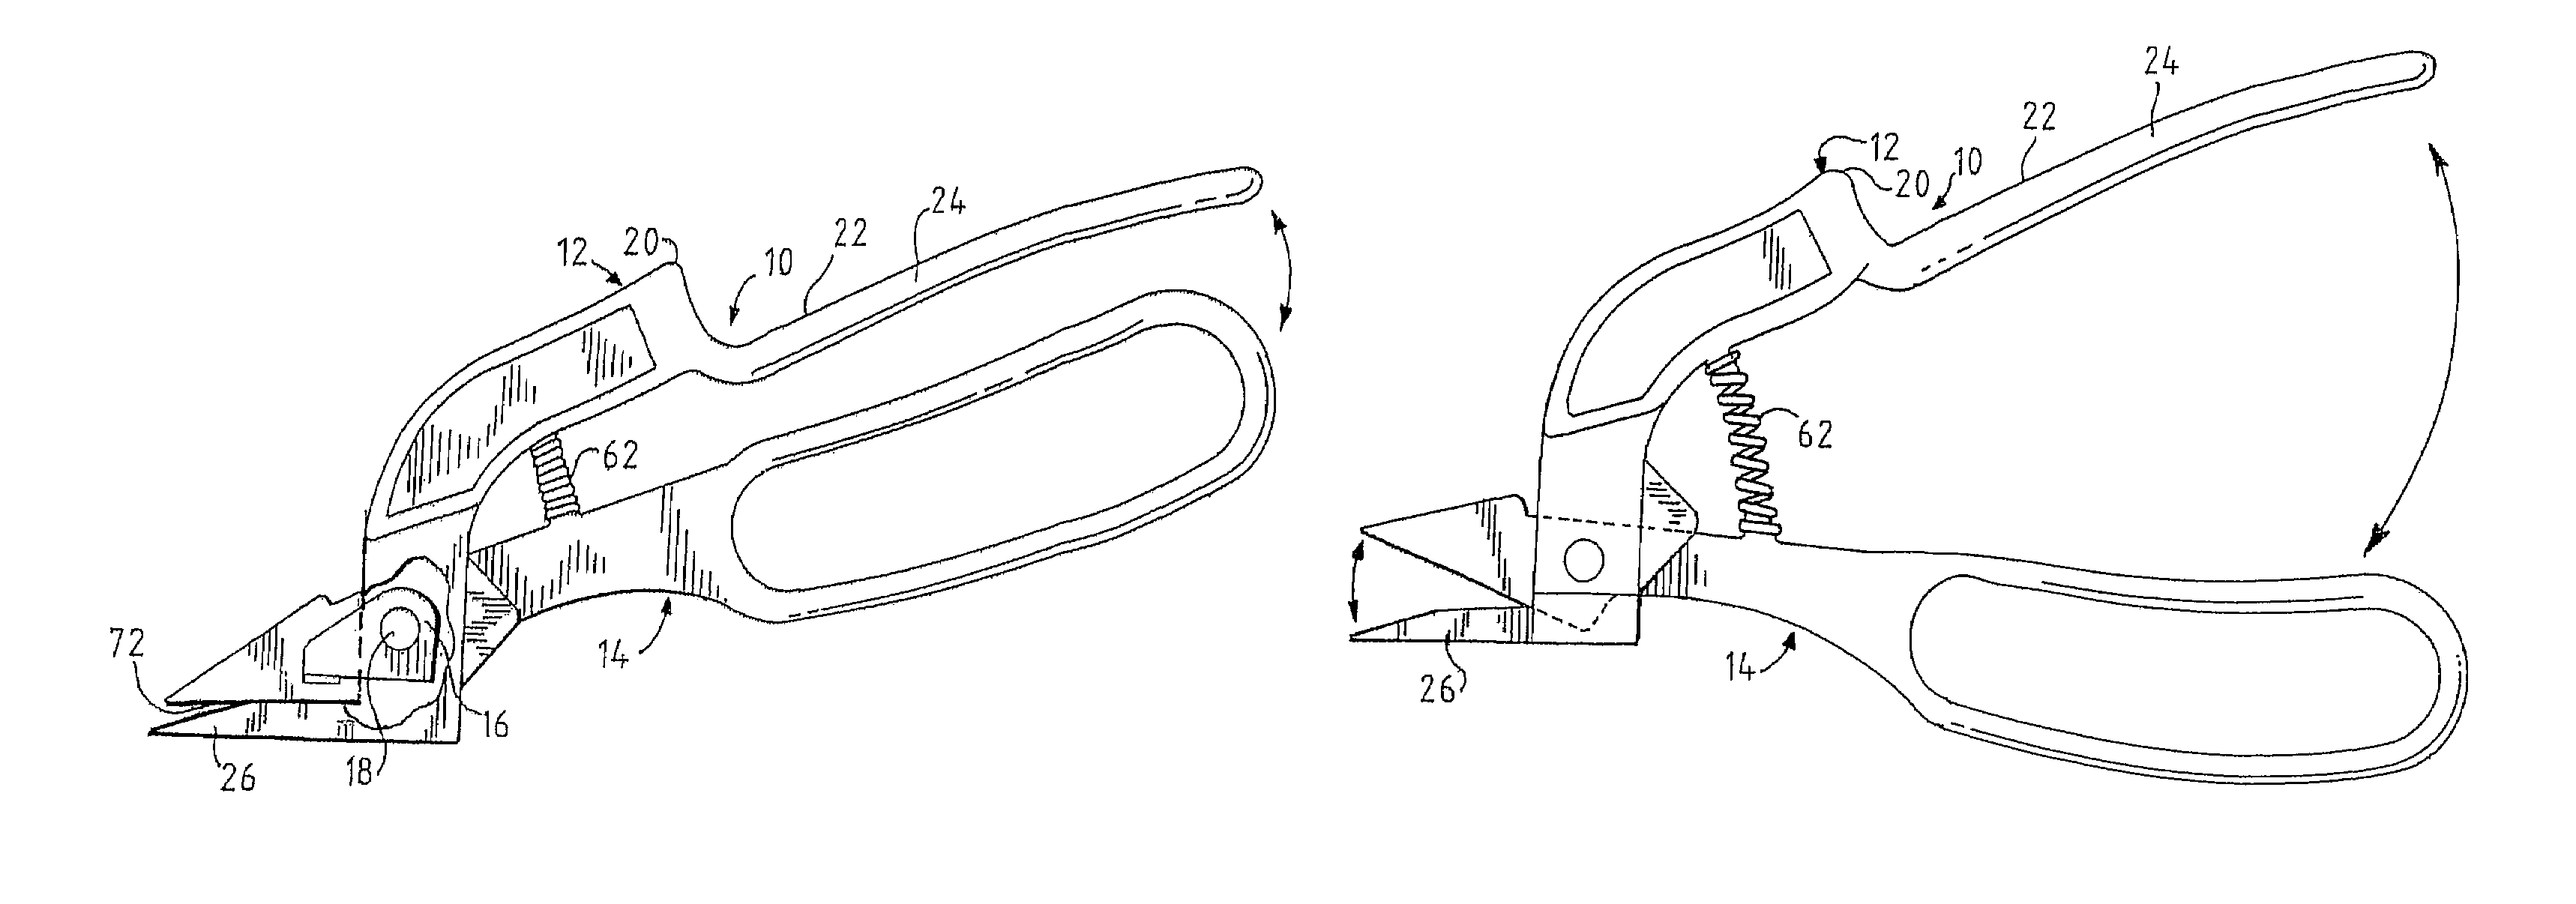 Cutting tool for a strap